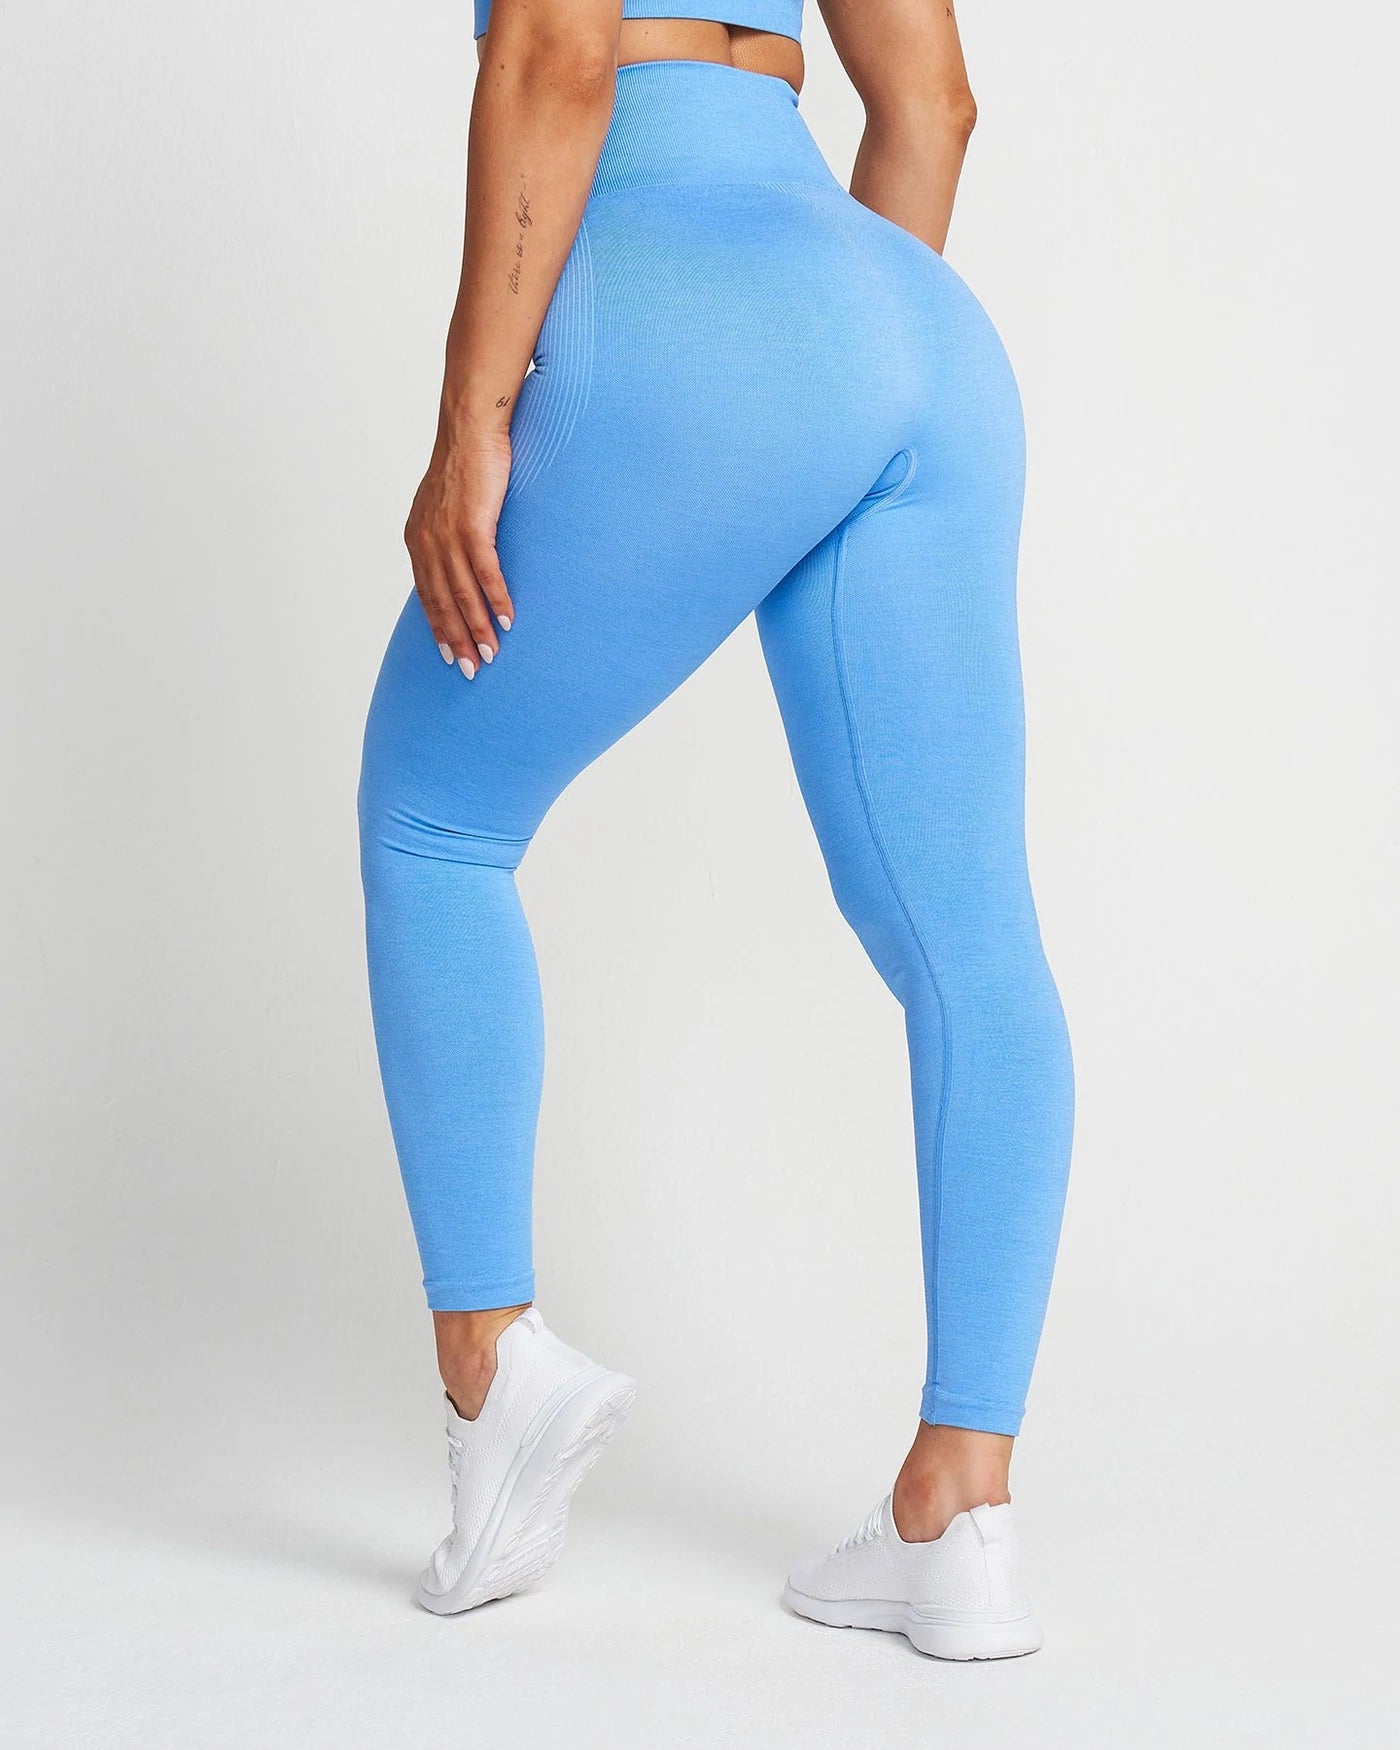 Magma Ultra High Legging In Blue/Blue Metal by Ultracor at ORCHARD